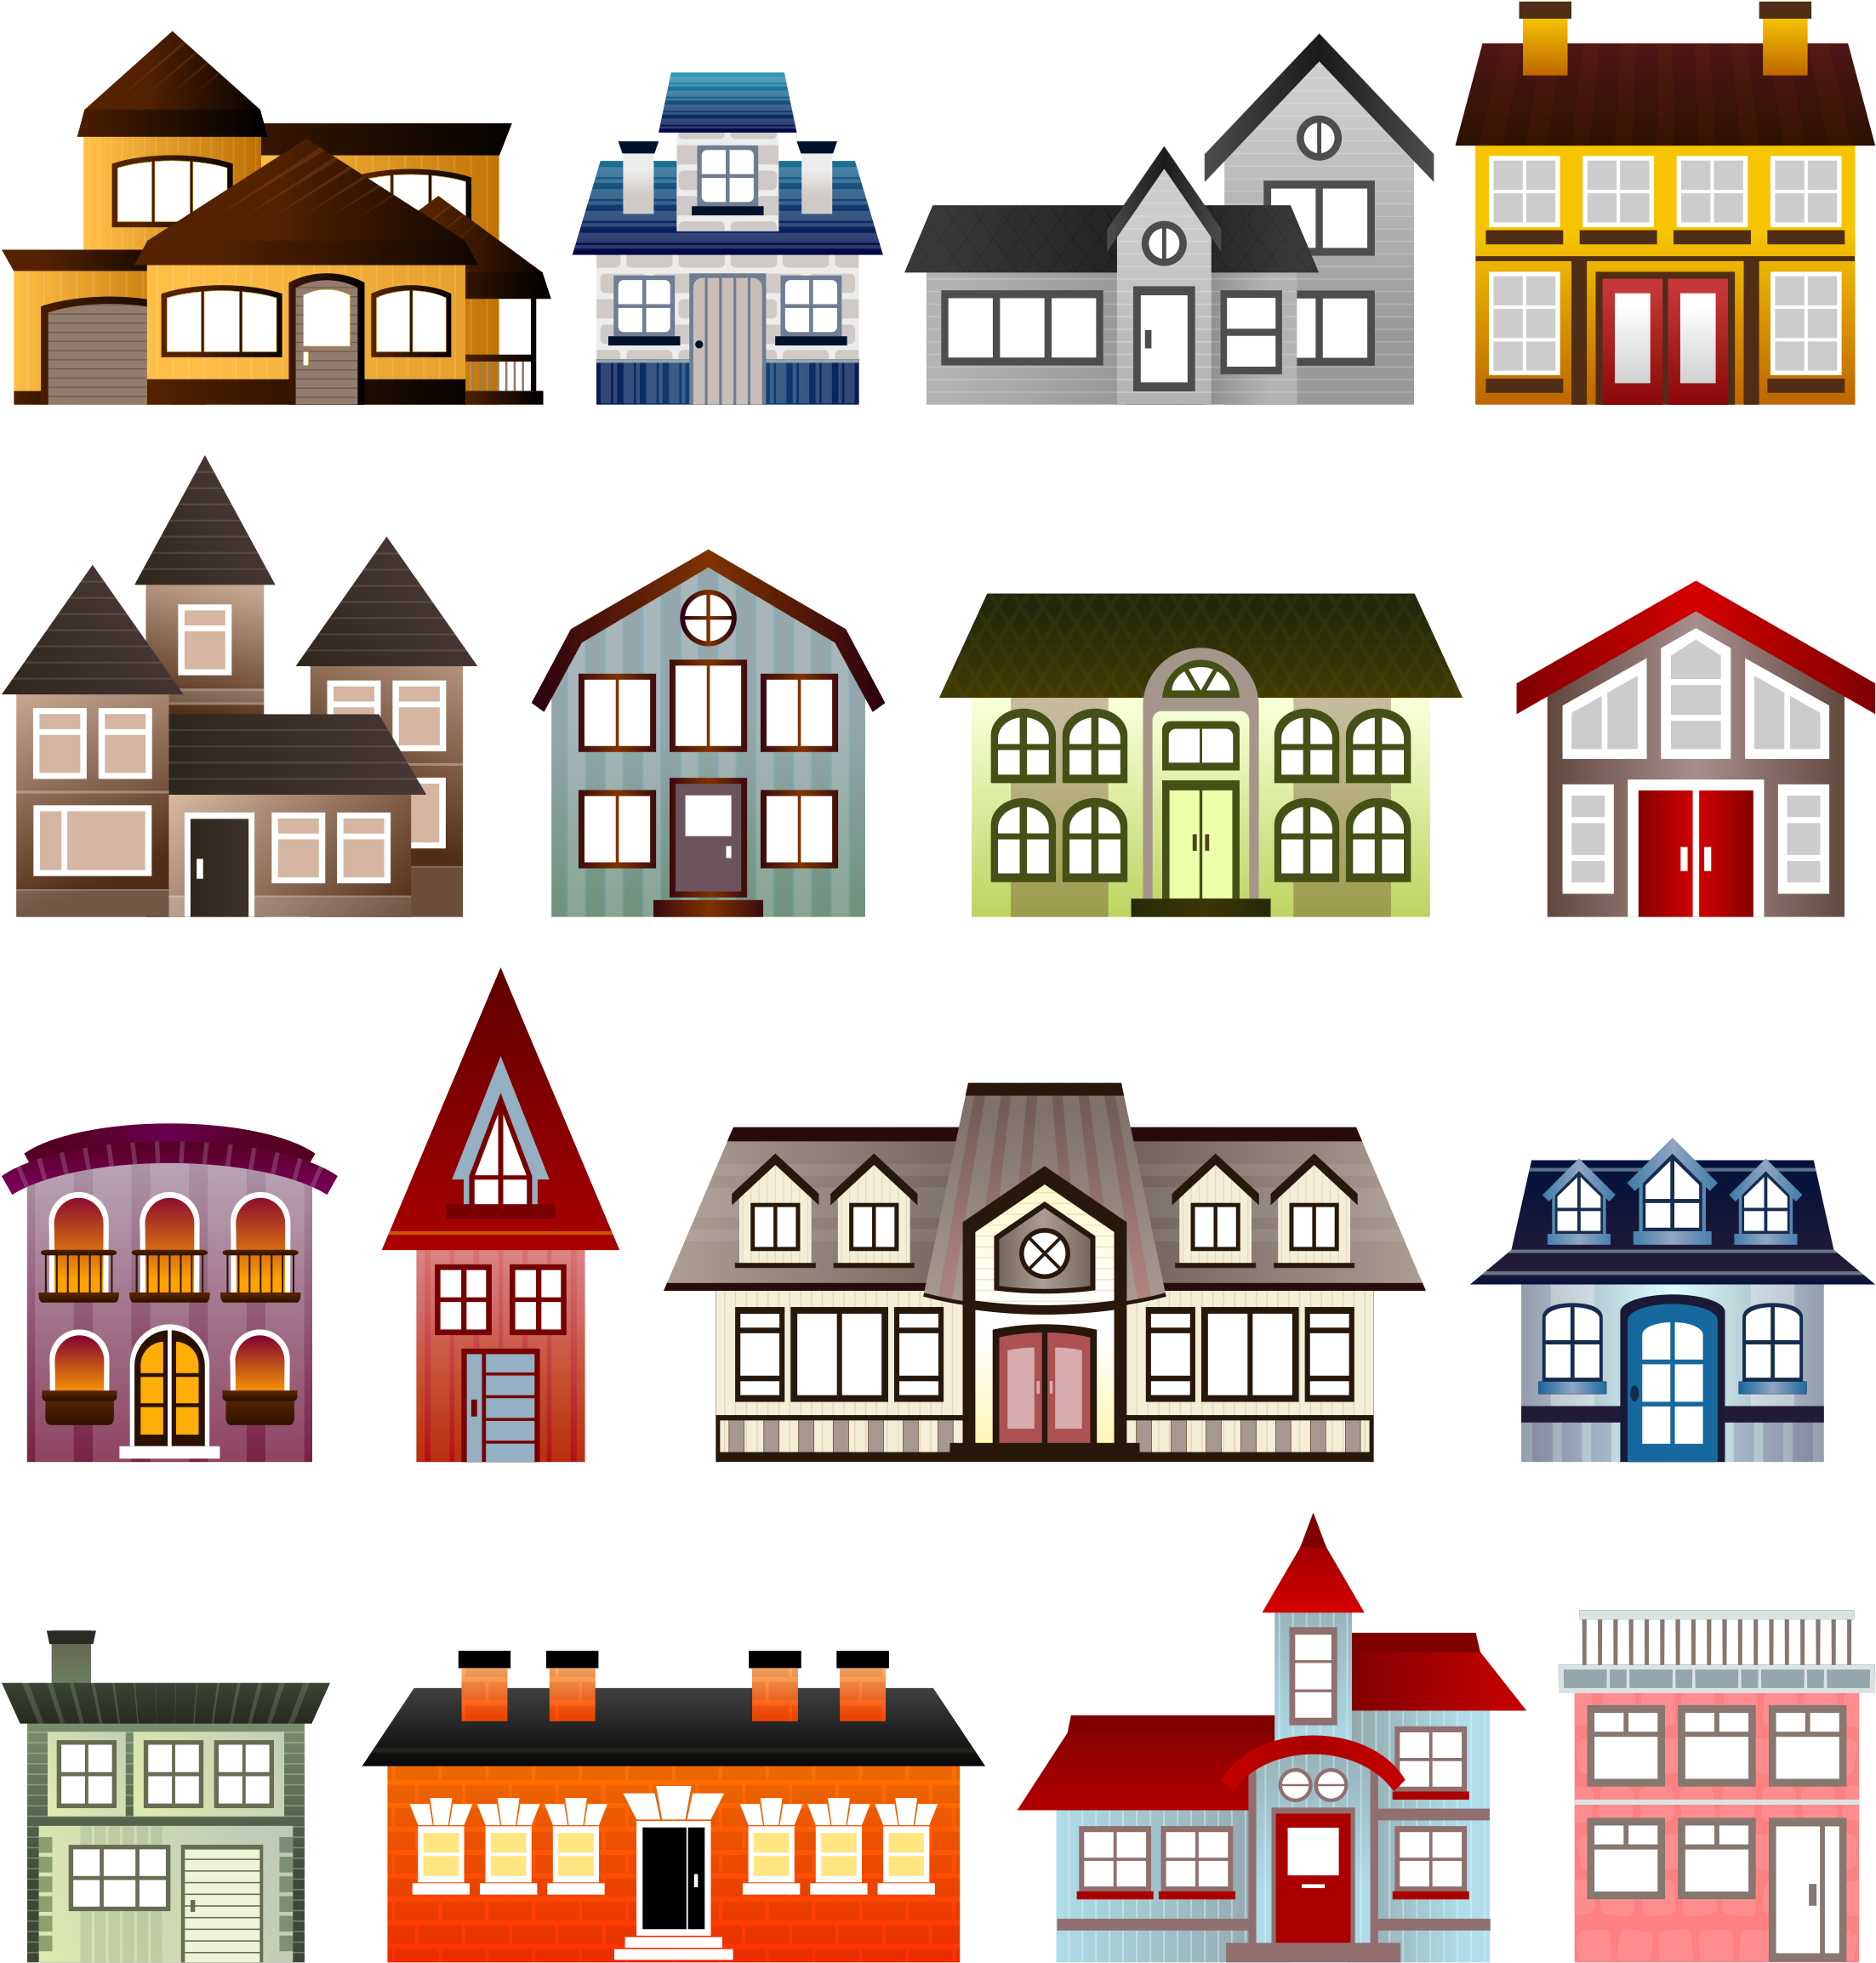 mansion clipart house exterior